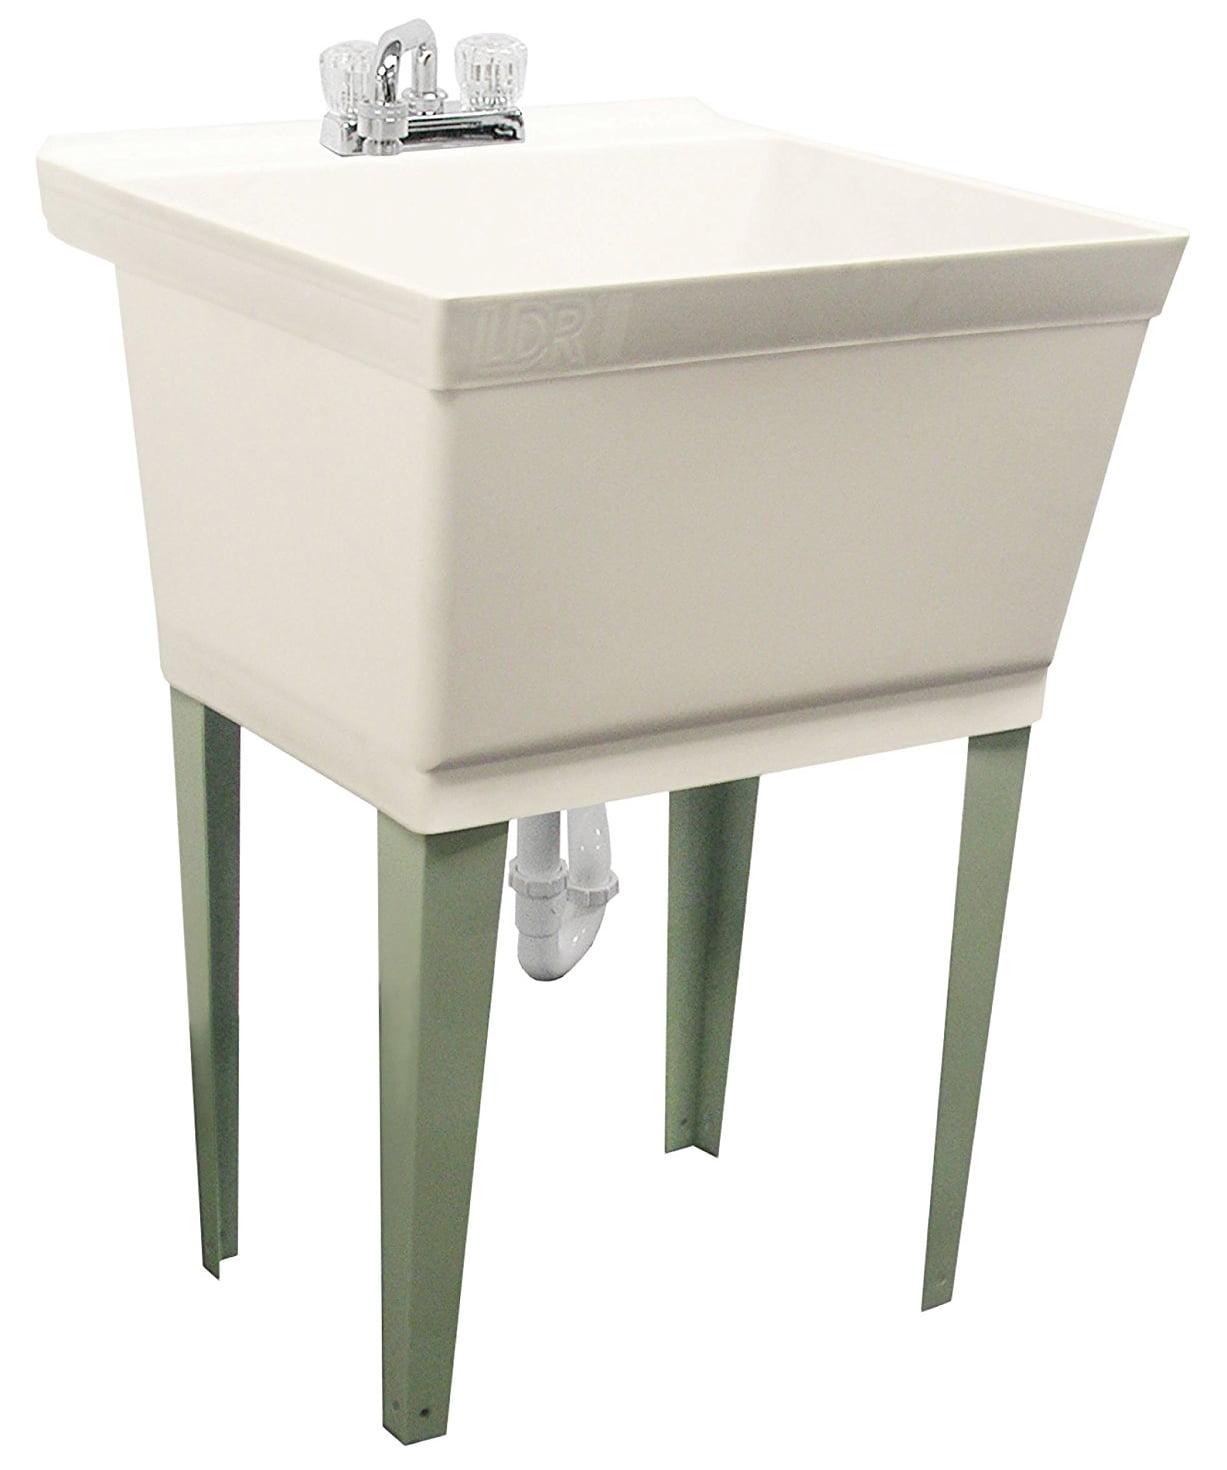 040 5000 19 Gal Laundry & Utility Tub With Faucet